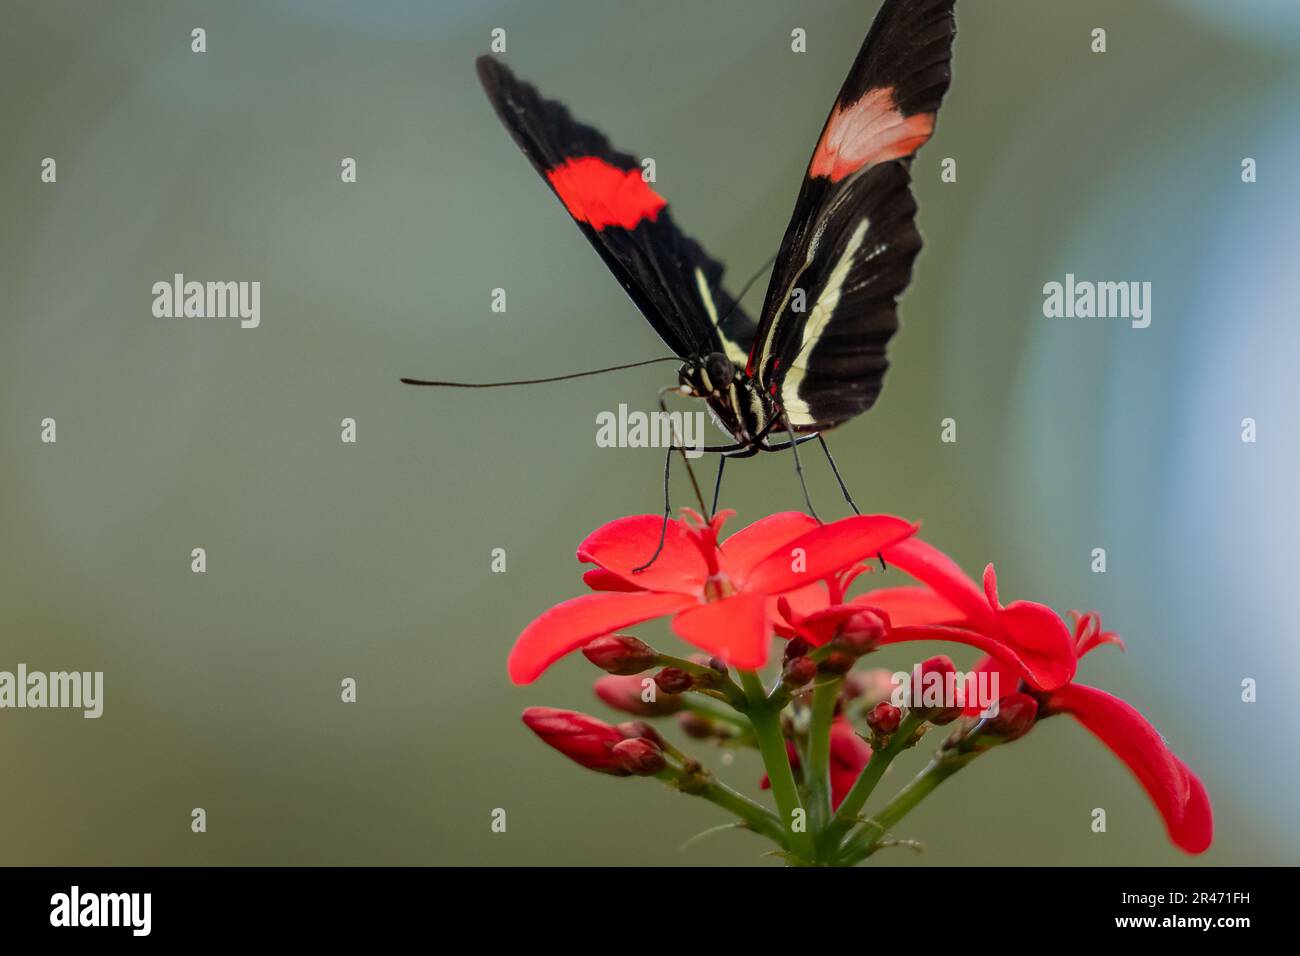 A close-up of a beautiful Postman butterfly (Heliconius melpomene) perched atop a vibrant red flower Stock Photo